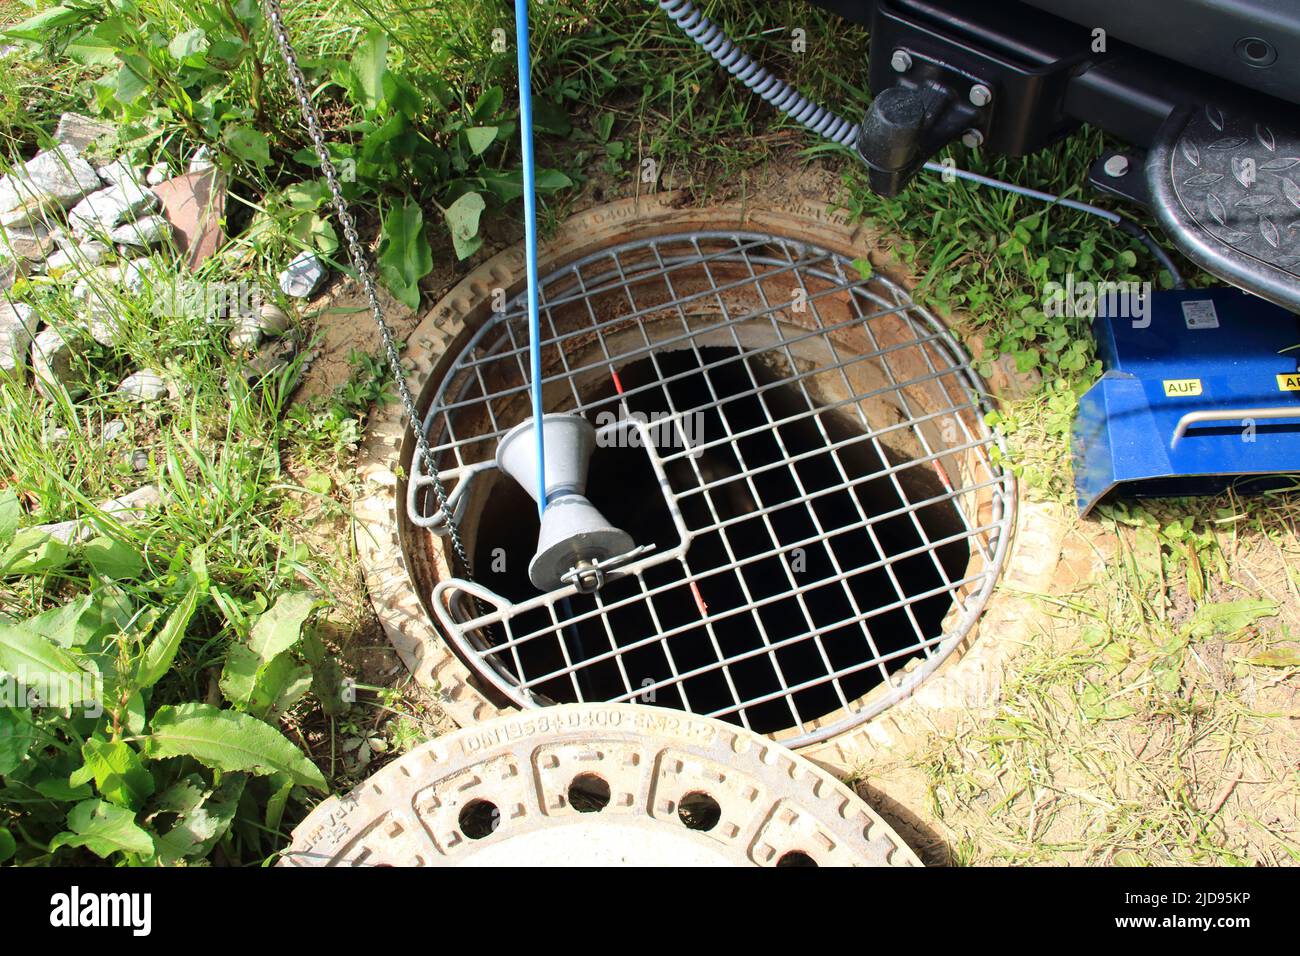 Control of a sewage shaft with camera and fall protection at the shaft Stock Photo